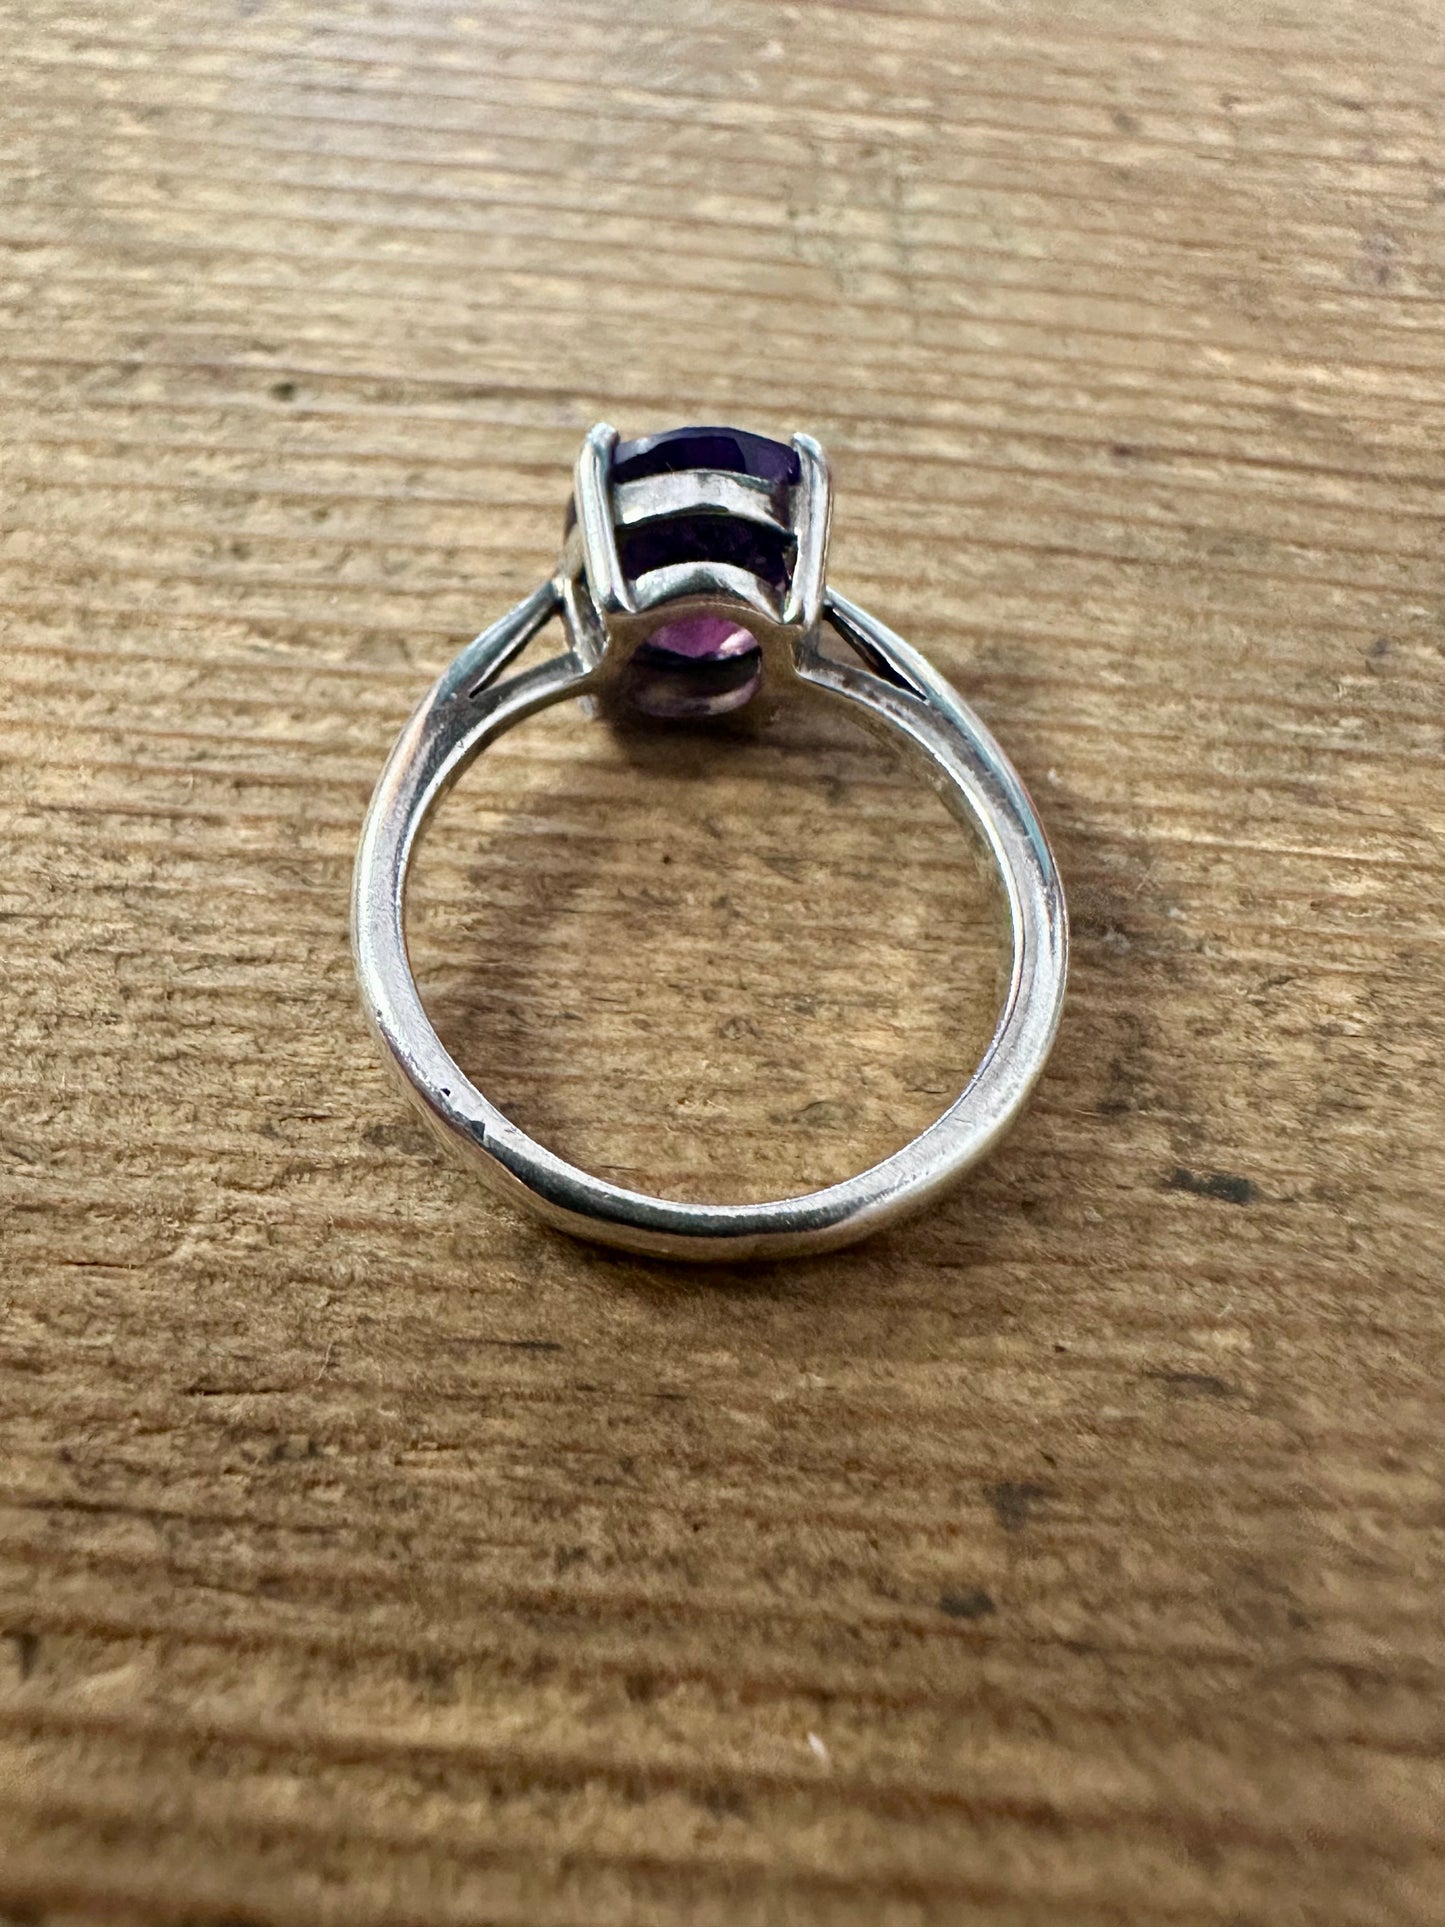 Vintage Amethyst 925 Silver Size M Ring